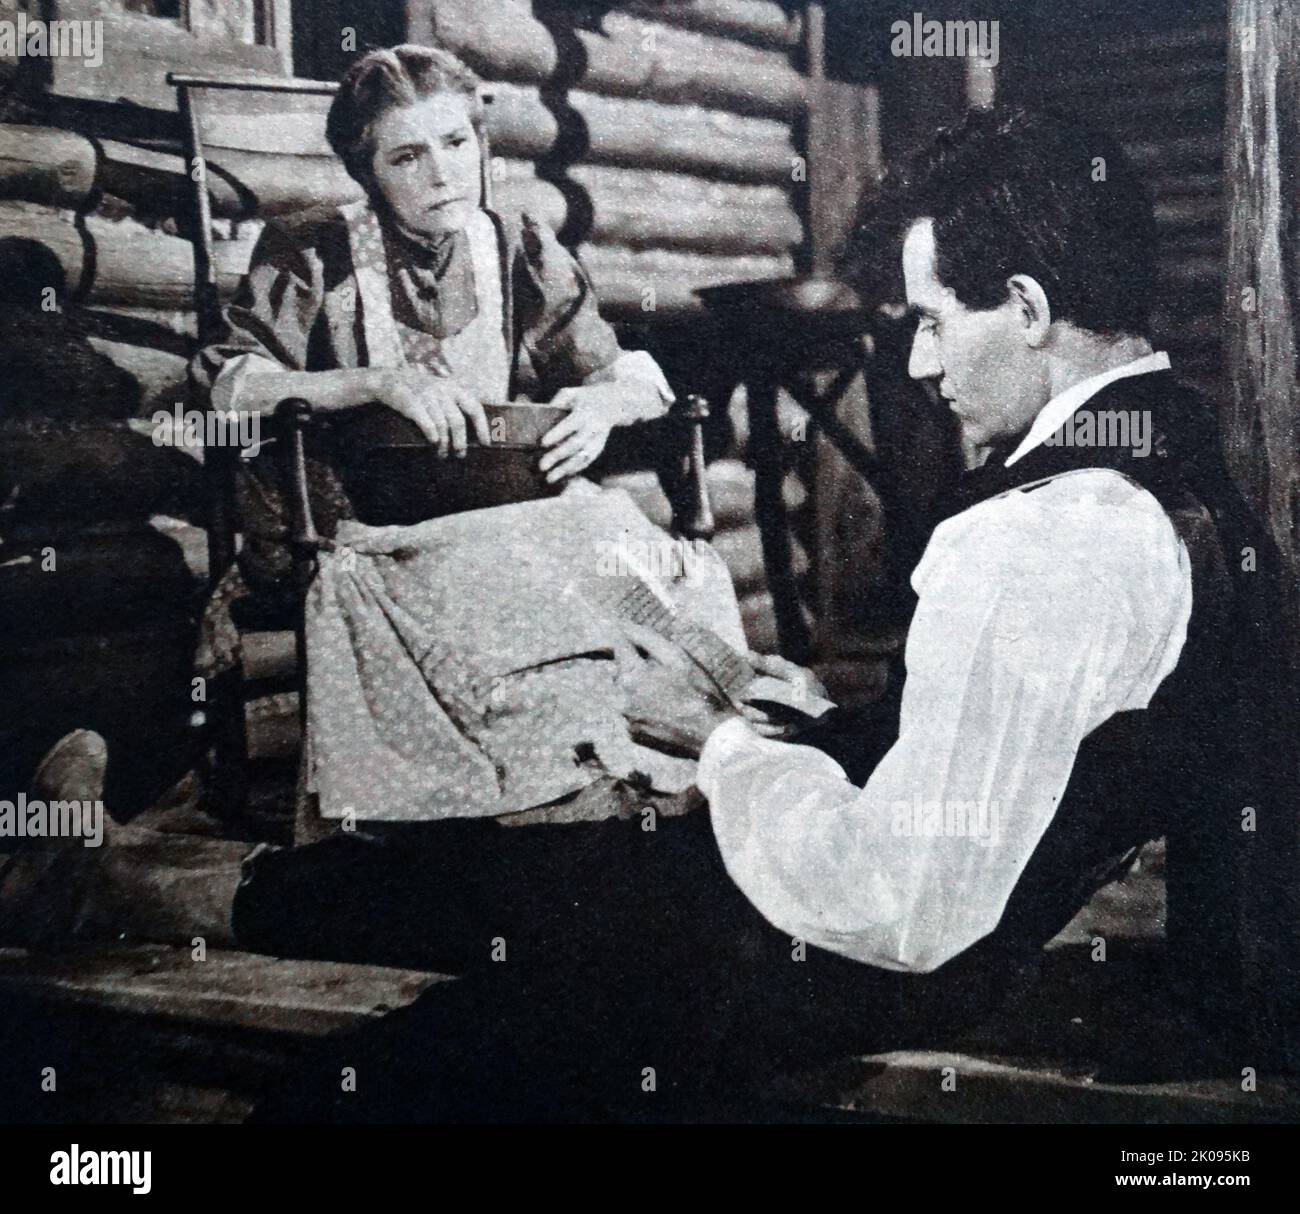 Henry Fonda and Alice Brady in Young Mr. Lincoln, a 1939 American biographical drama film about the early life of President Abraham Lincoln. Henry Jaynes Fonda (May 16, 1905 - August 12, 1982) was an American film and stage actor who had a career that spanned five decades in Hollywood. Alice Brady (born Mary Rose Brady; November 2, 1892 - October 28, 1939) was an American actress who began her career in the silent film era and survived the transition into talkies. Stock Photo